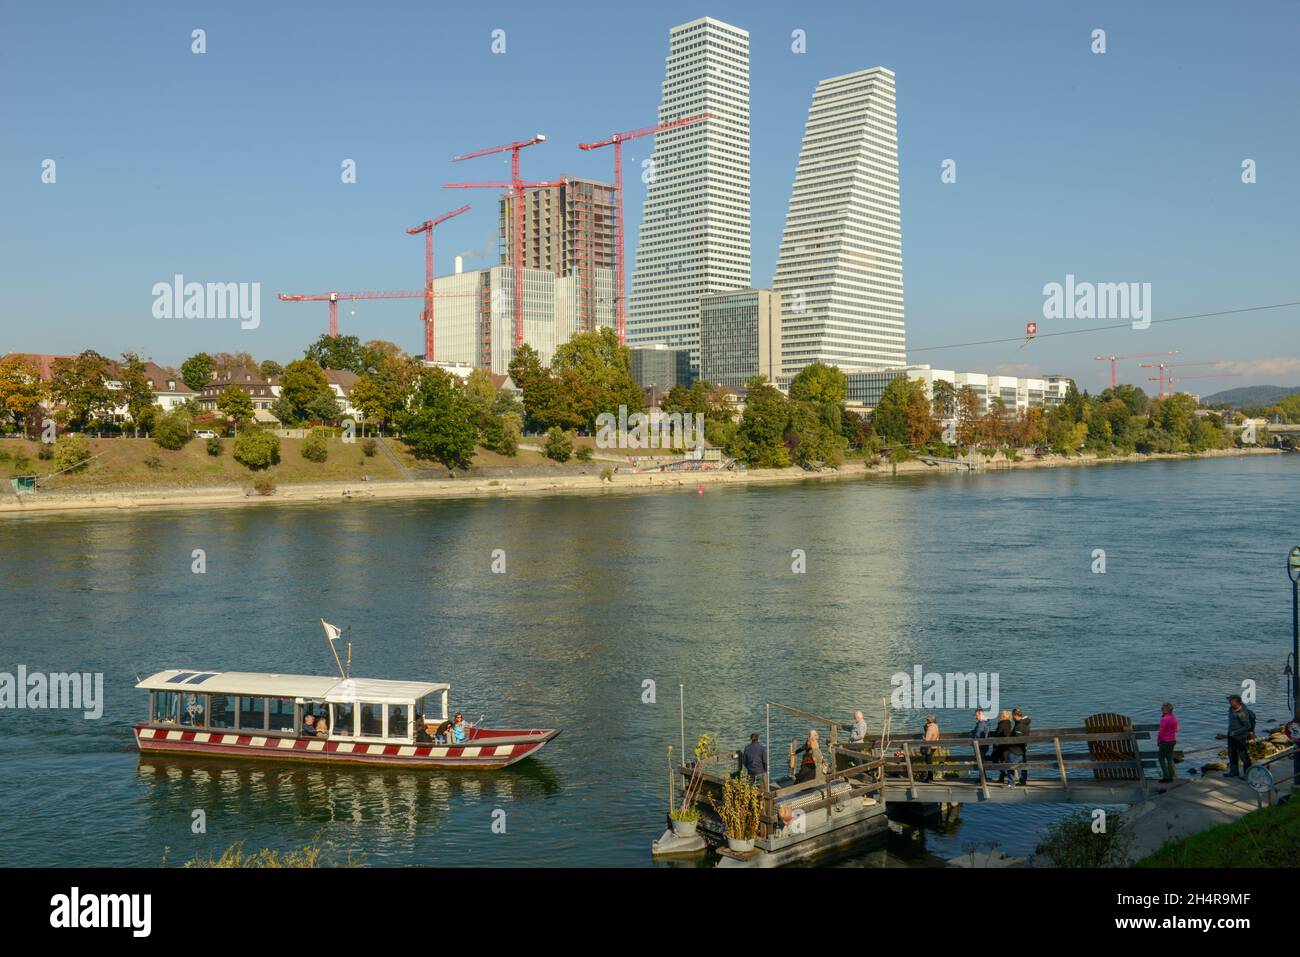 Basel, Switzerland - 17 September 2021: view at the Roche industry towers at Basel on Switzerland Stock Photo